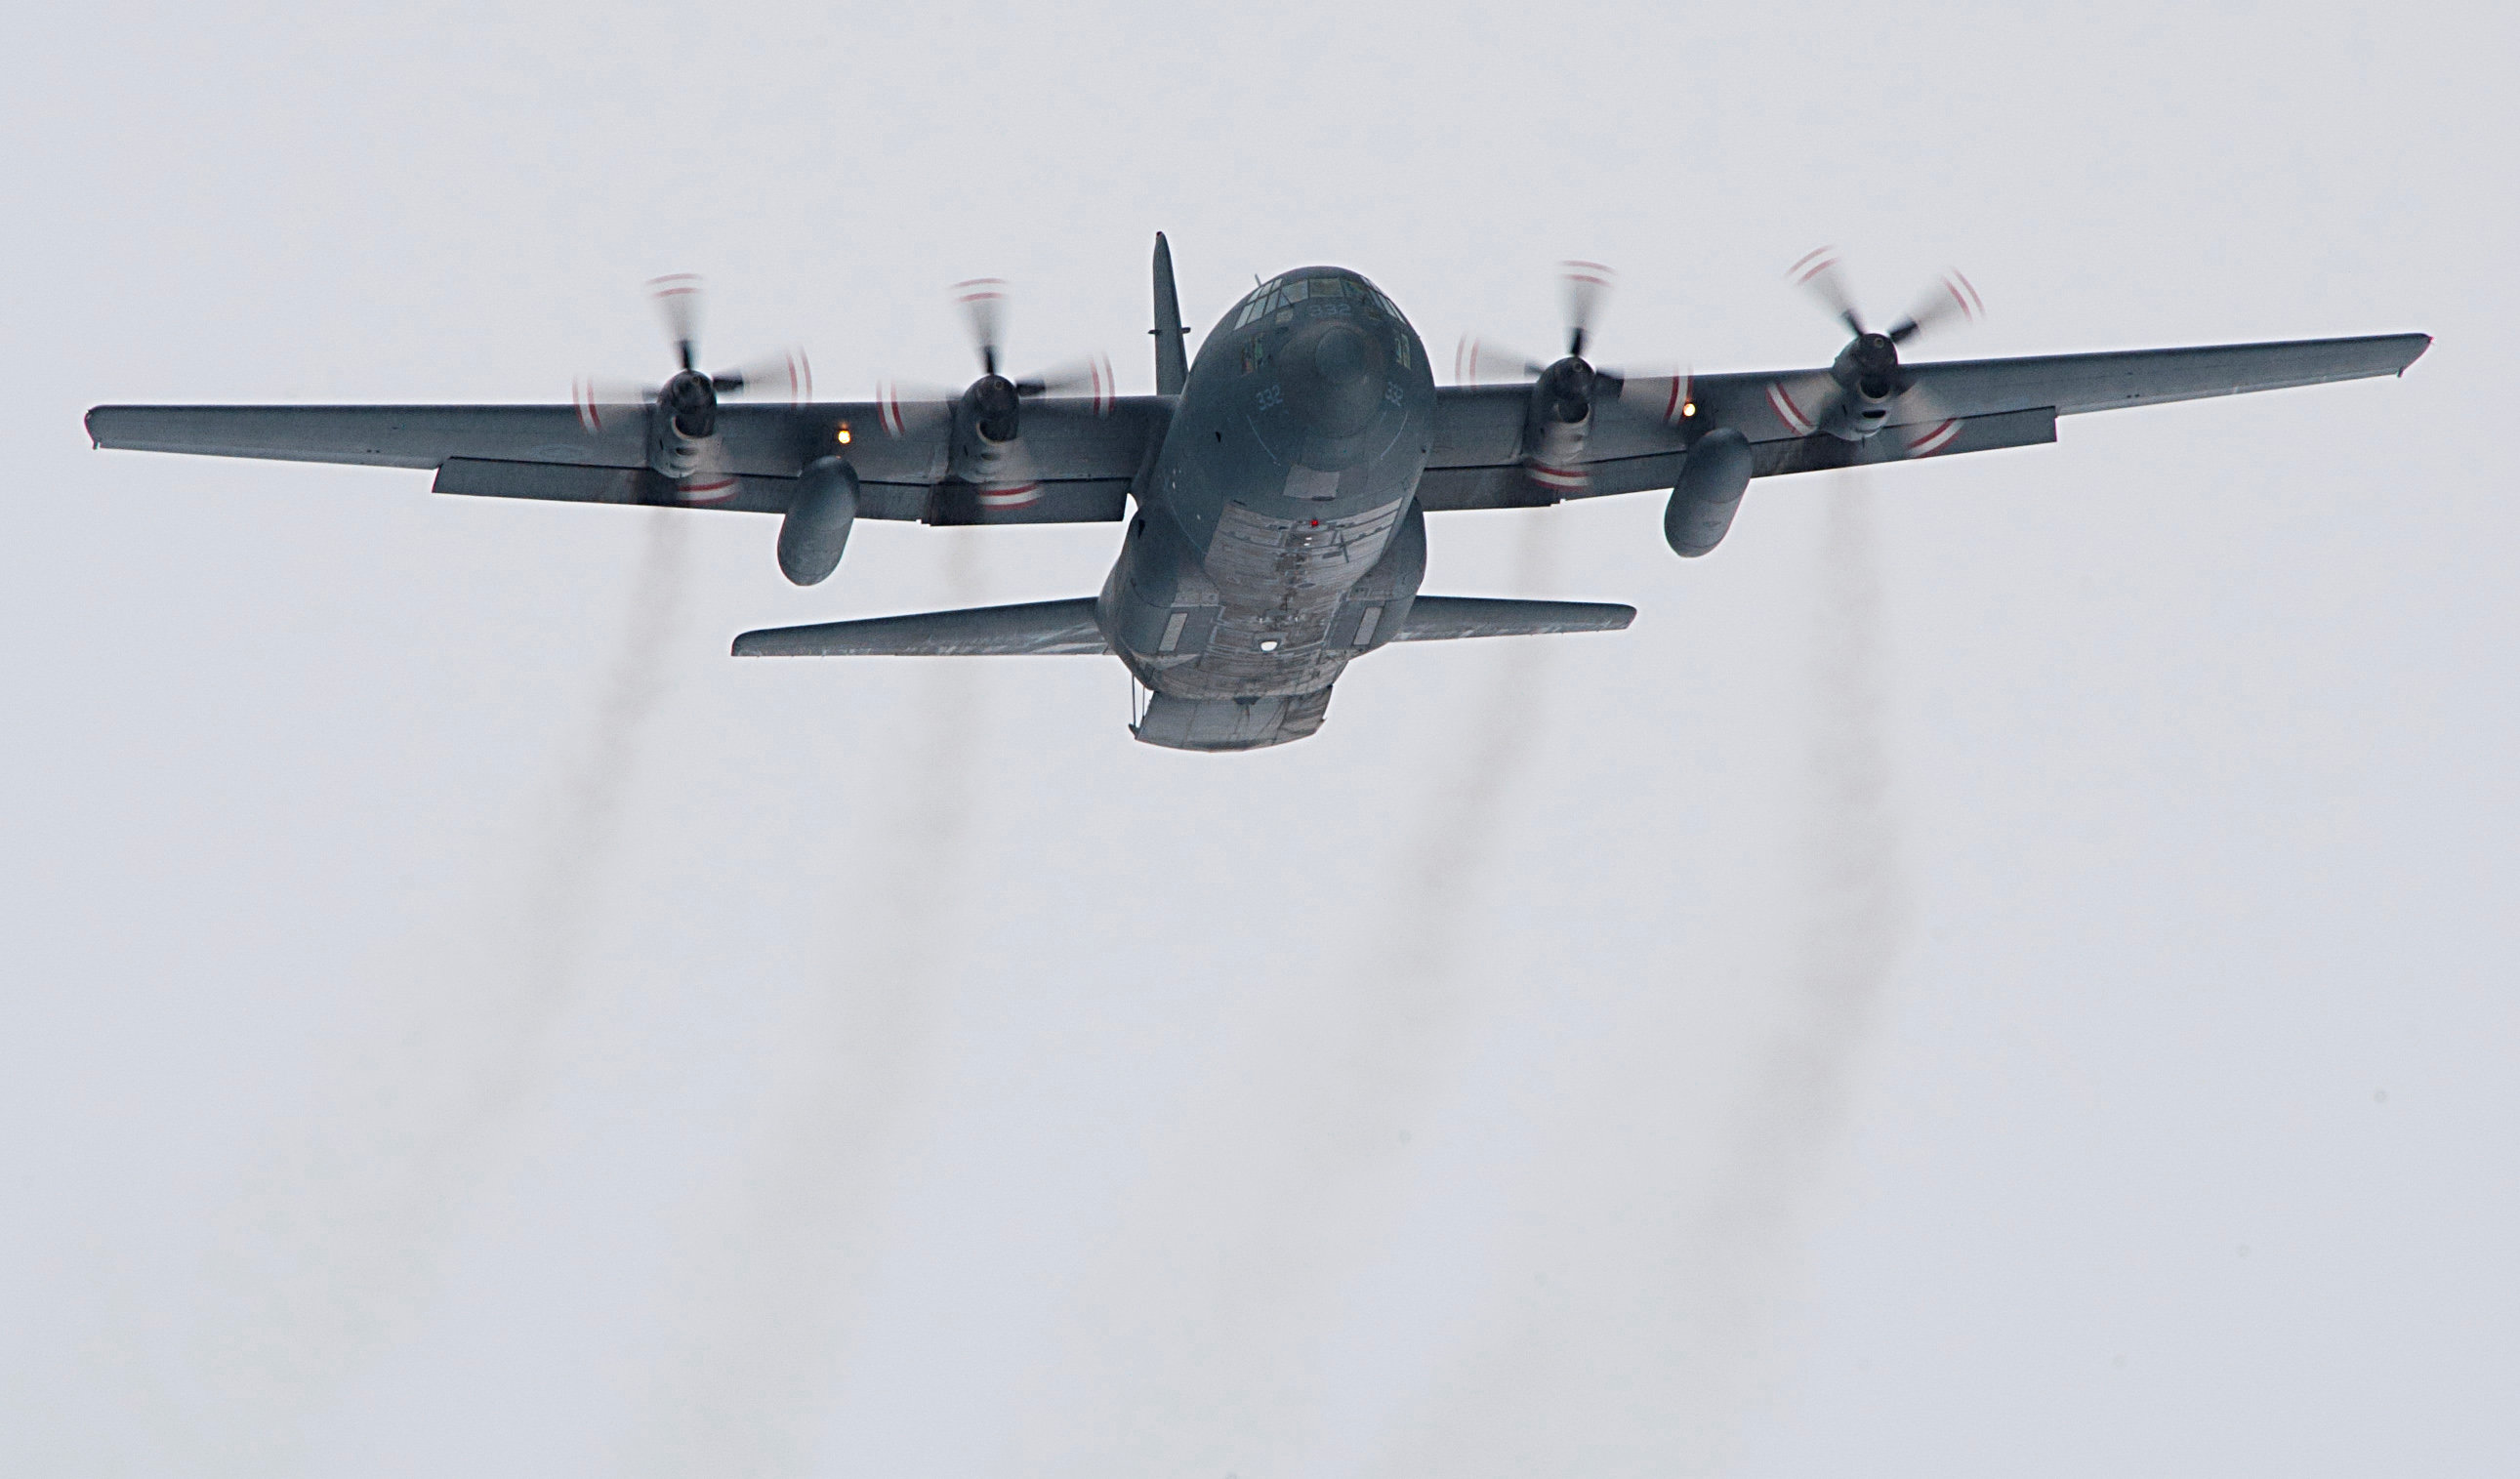 FILE PHOTO: A Royal Canadian Air Force CC-130 Hercules aircraft from 413 Transport and Rescue Squadron, 14 Wing Greenwood, Nova Scotia, does a fly-past of the drop zone for search and rescue training in Gascoyne Inlet, Nunavut, Canada April 21, 2012. Cpl Jax Kennedy/RCAF/Handout/File Photo via REUTERS